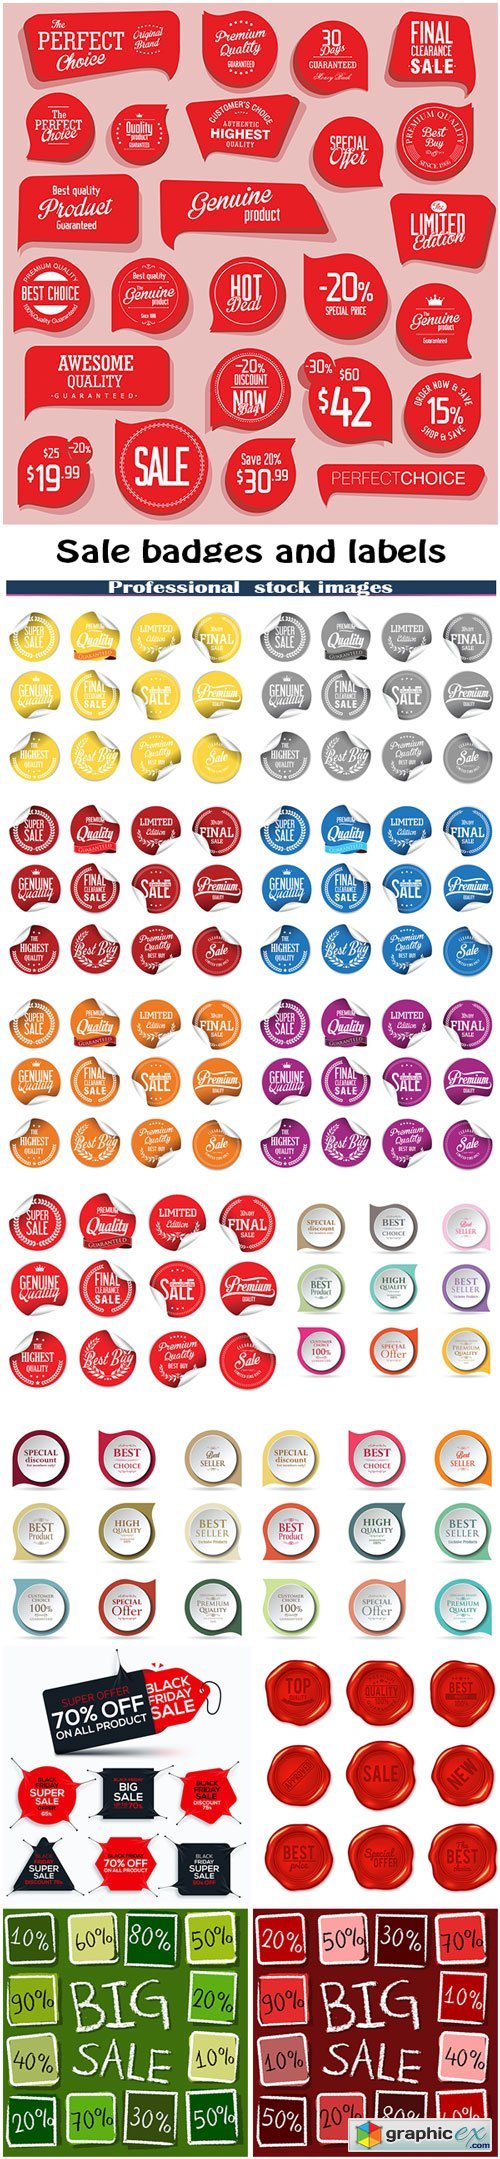 Sale badges and labels